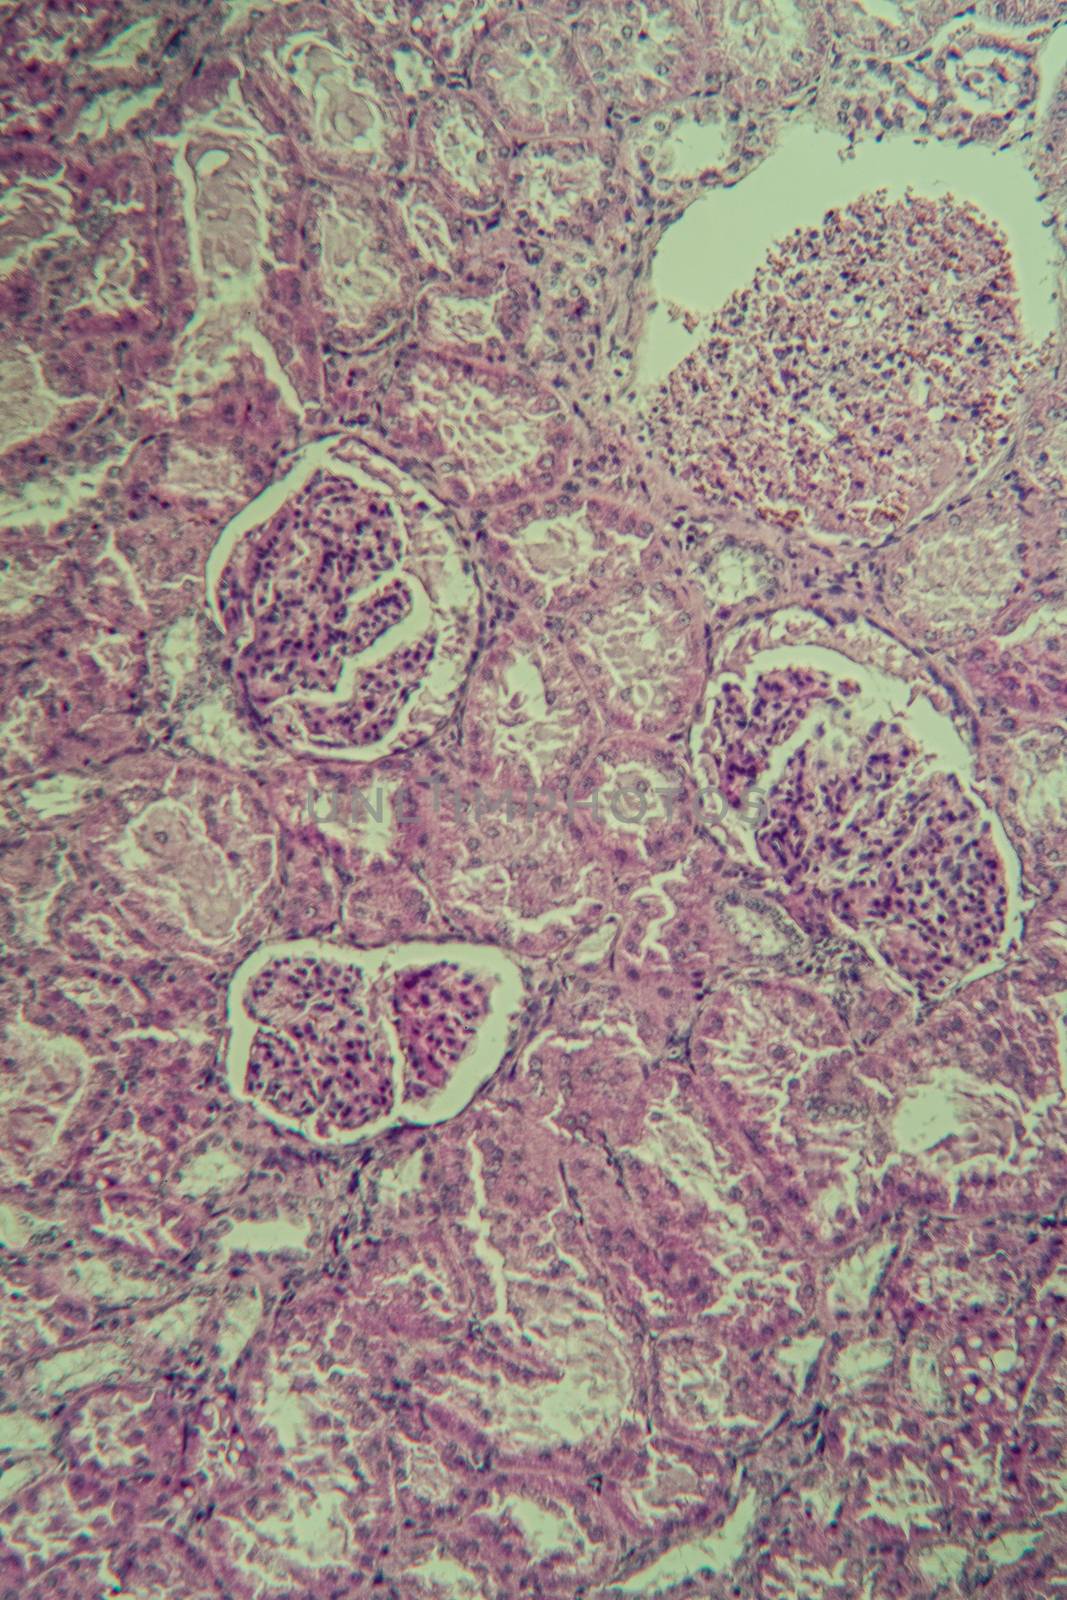 Cross section of the kidney with Glumeroli 100x by Dr-Lange